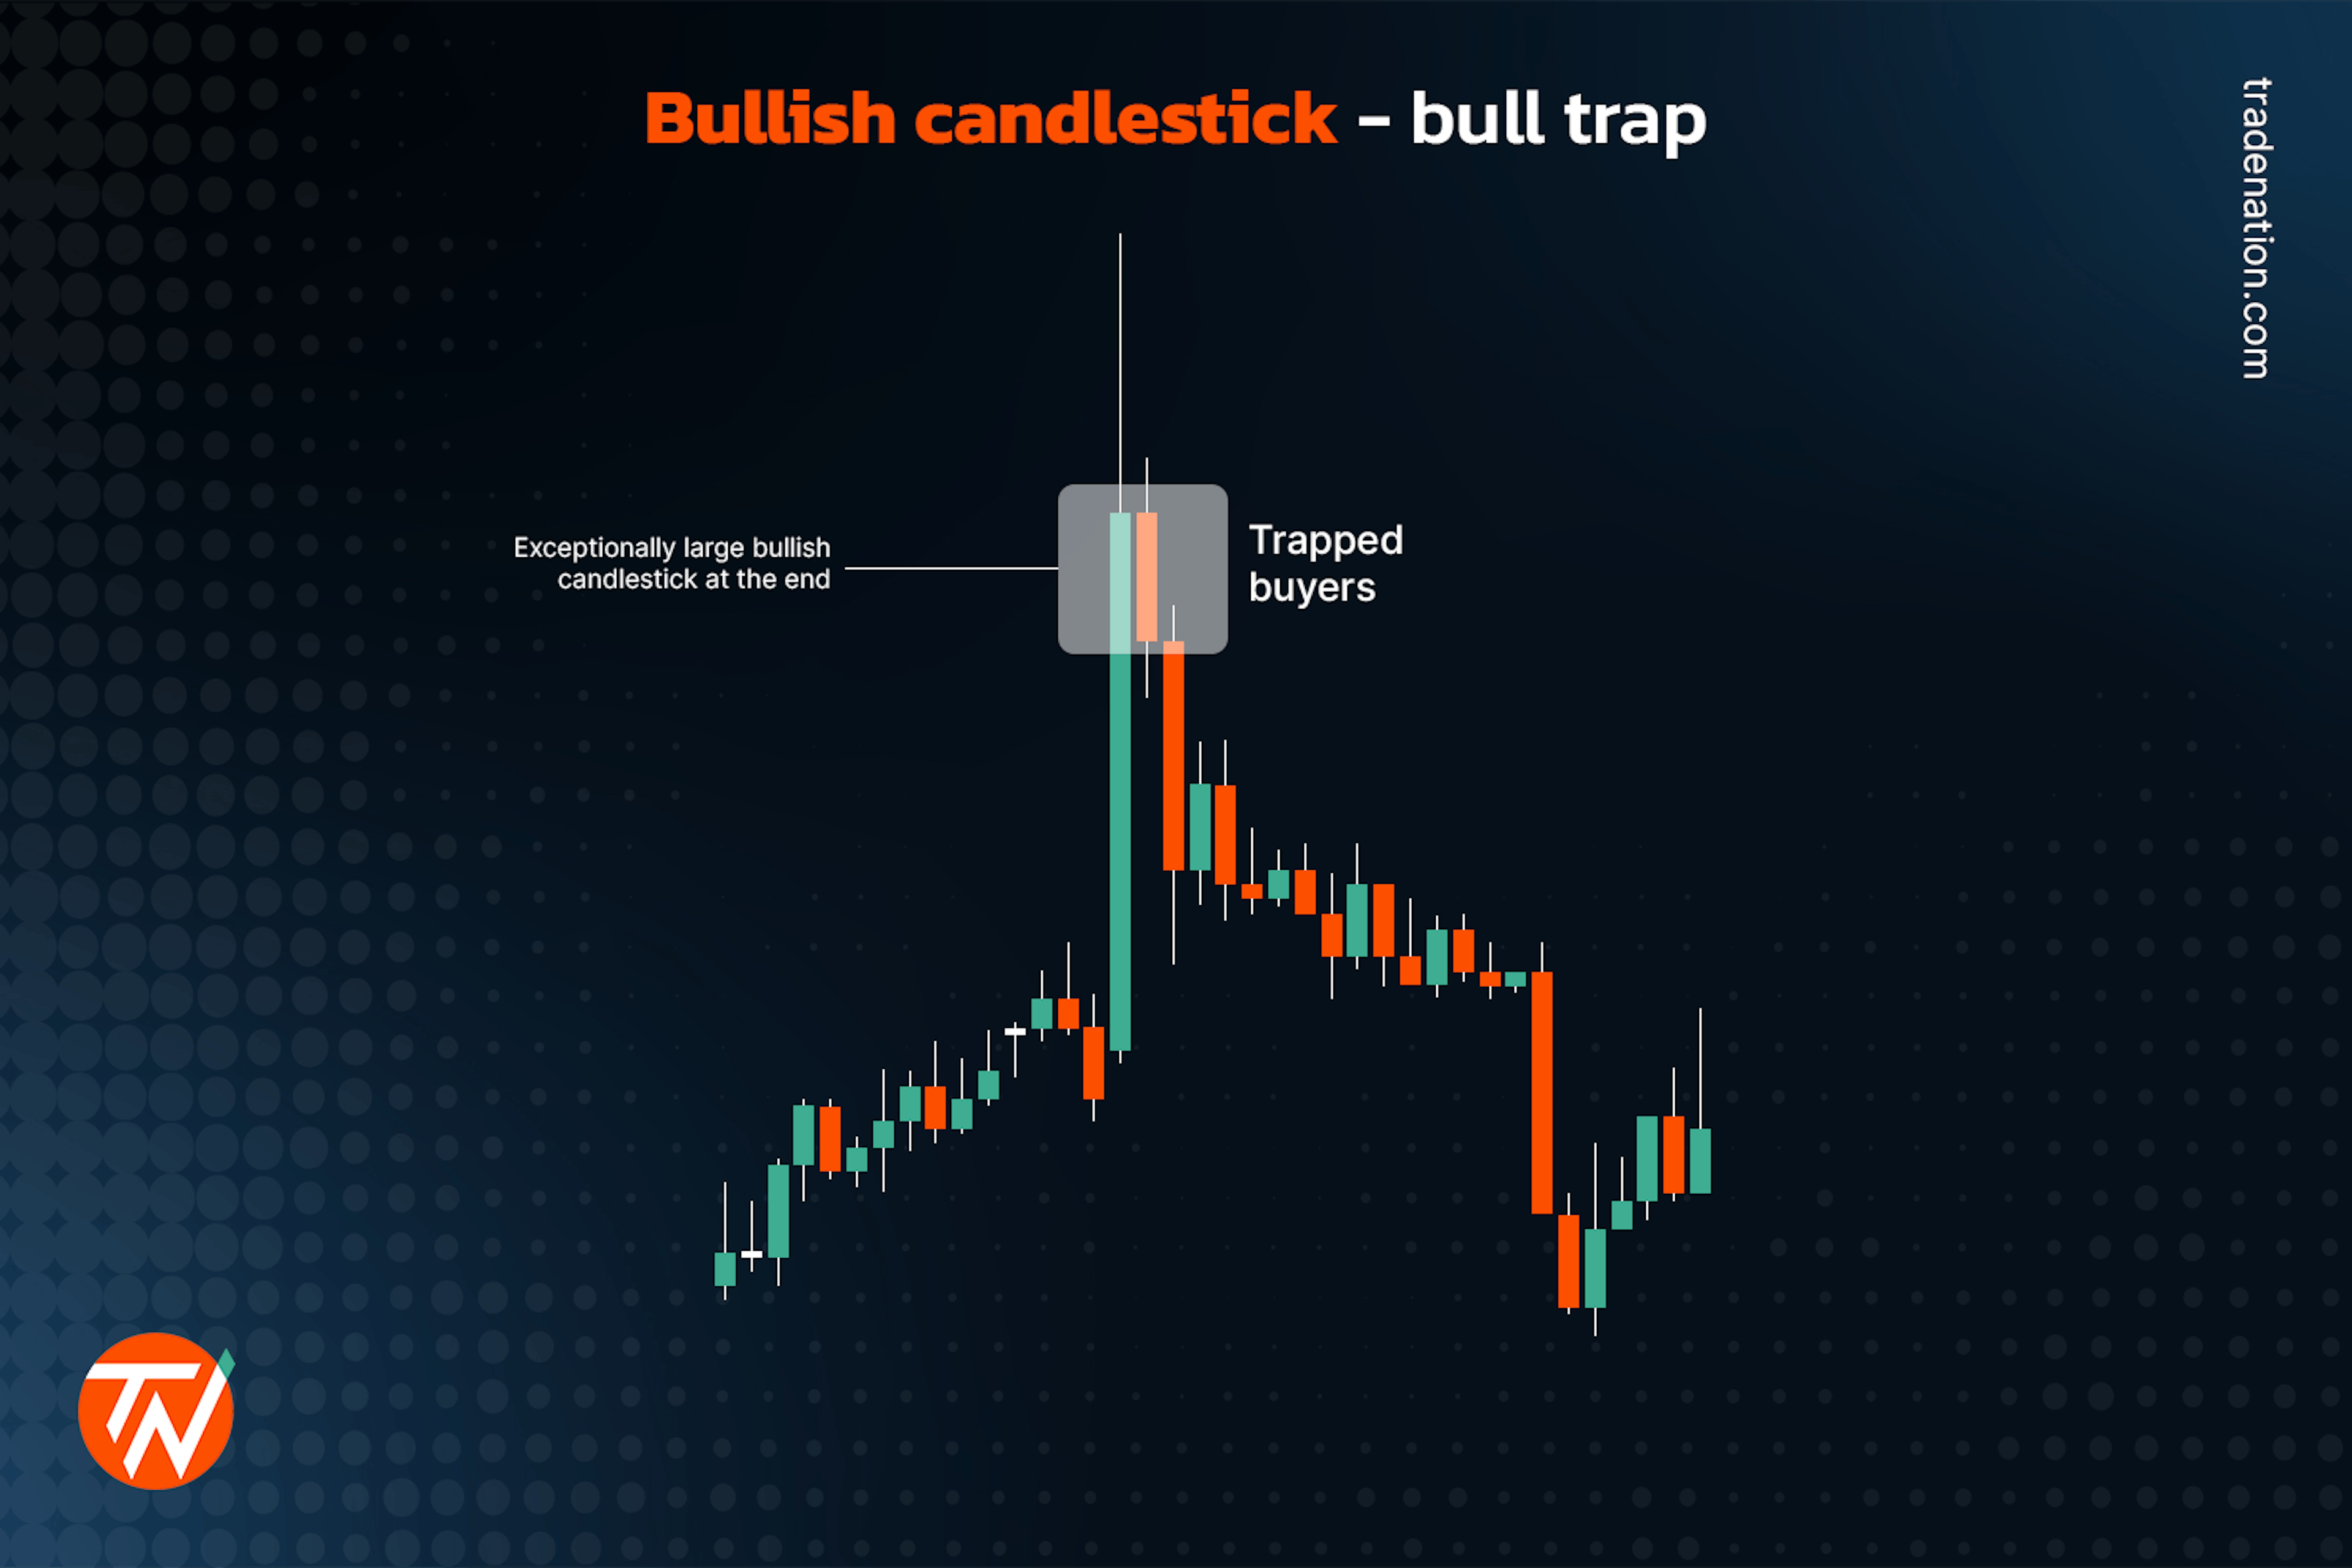 Bullish candlestick with bull trap demonstrated